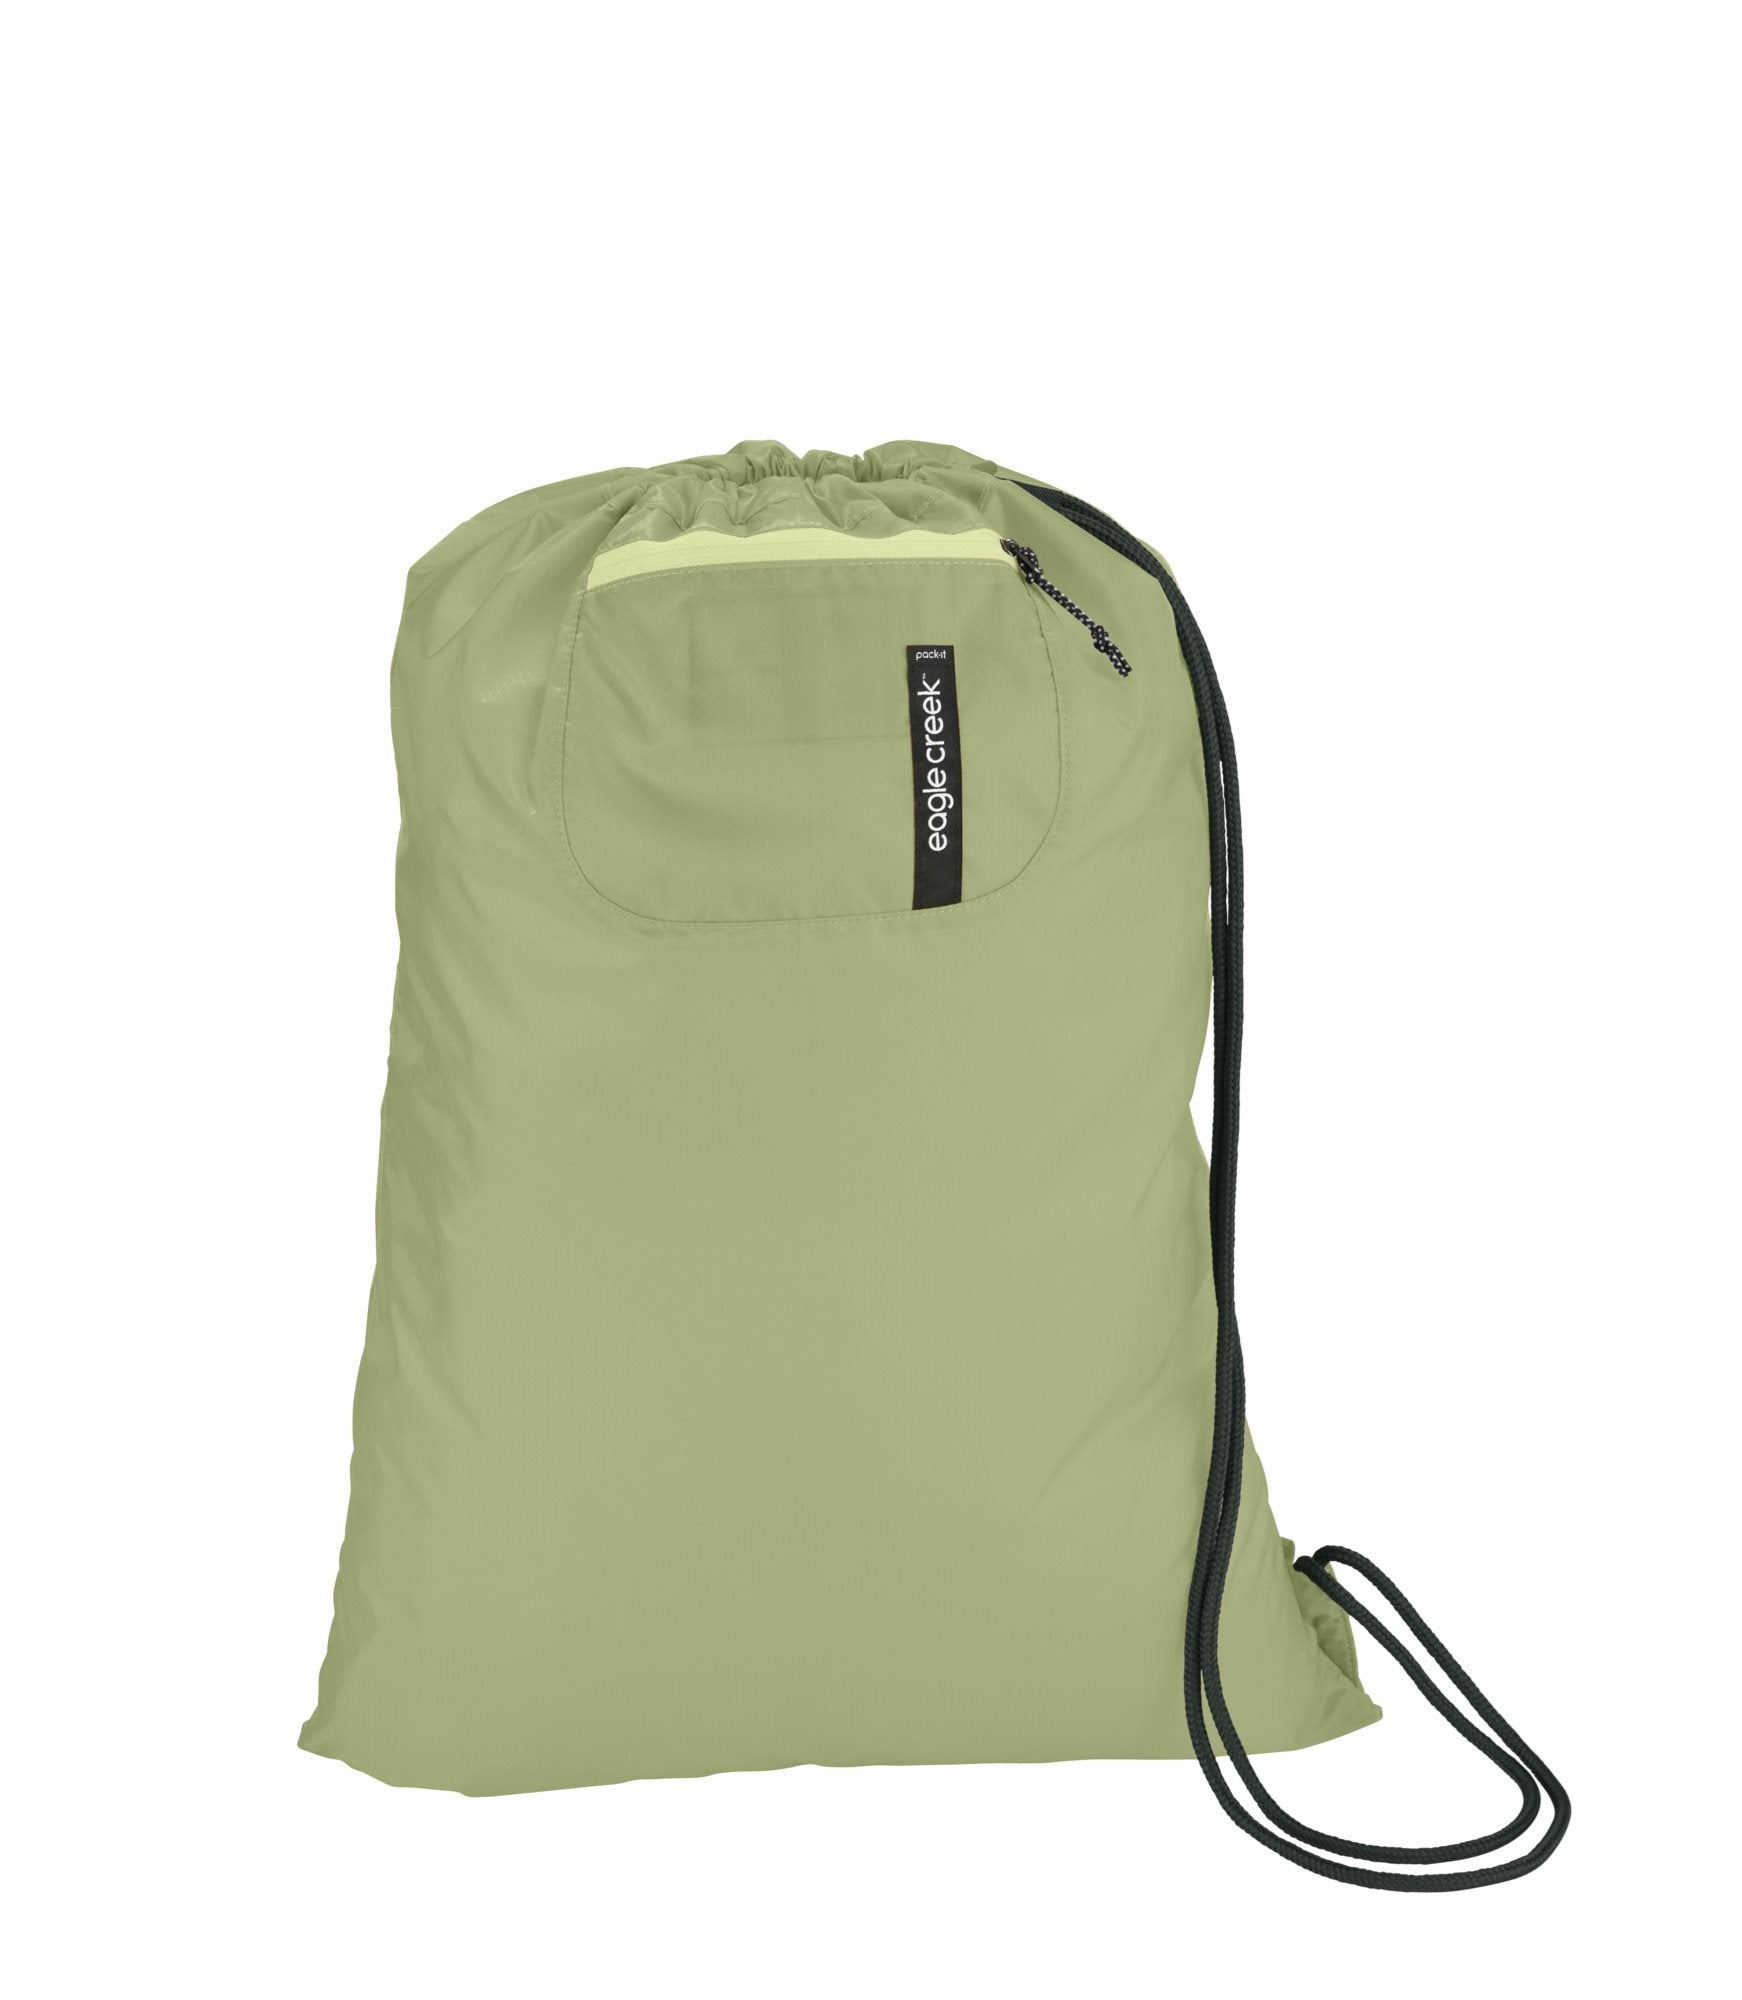 Eagle Creek Pack-It Isolate Laundry Sac - mossy green Bagage Organizer - Reisartikelen-nl